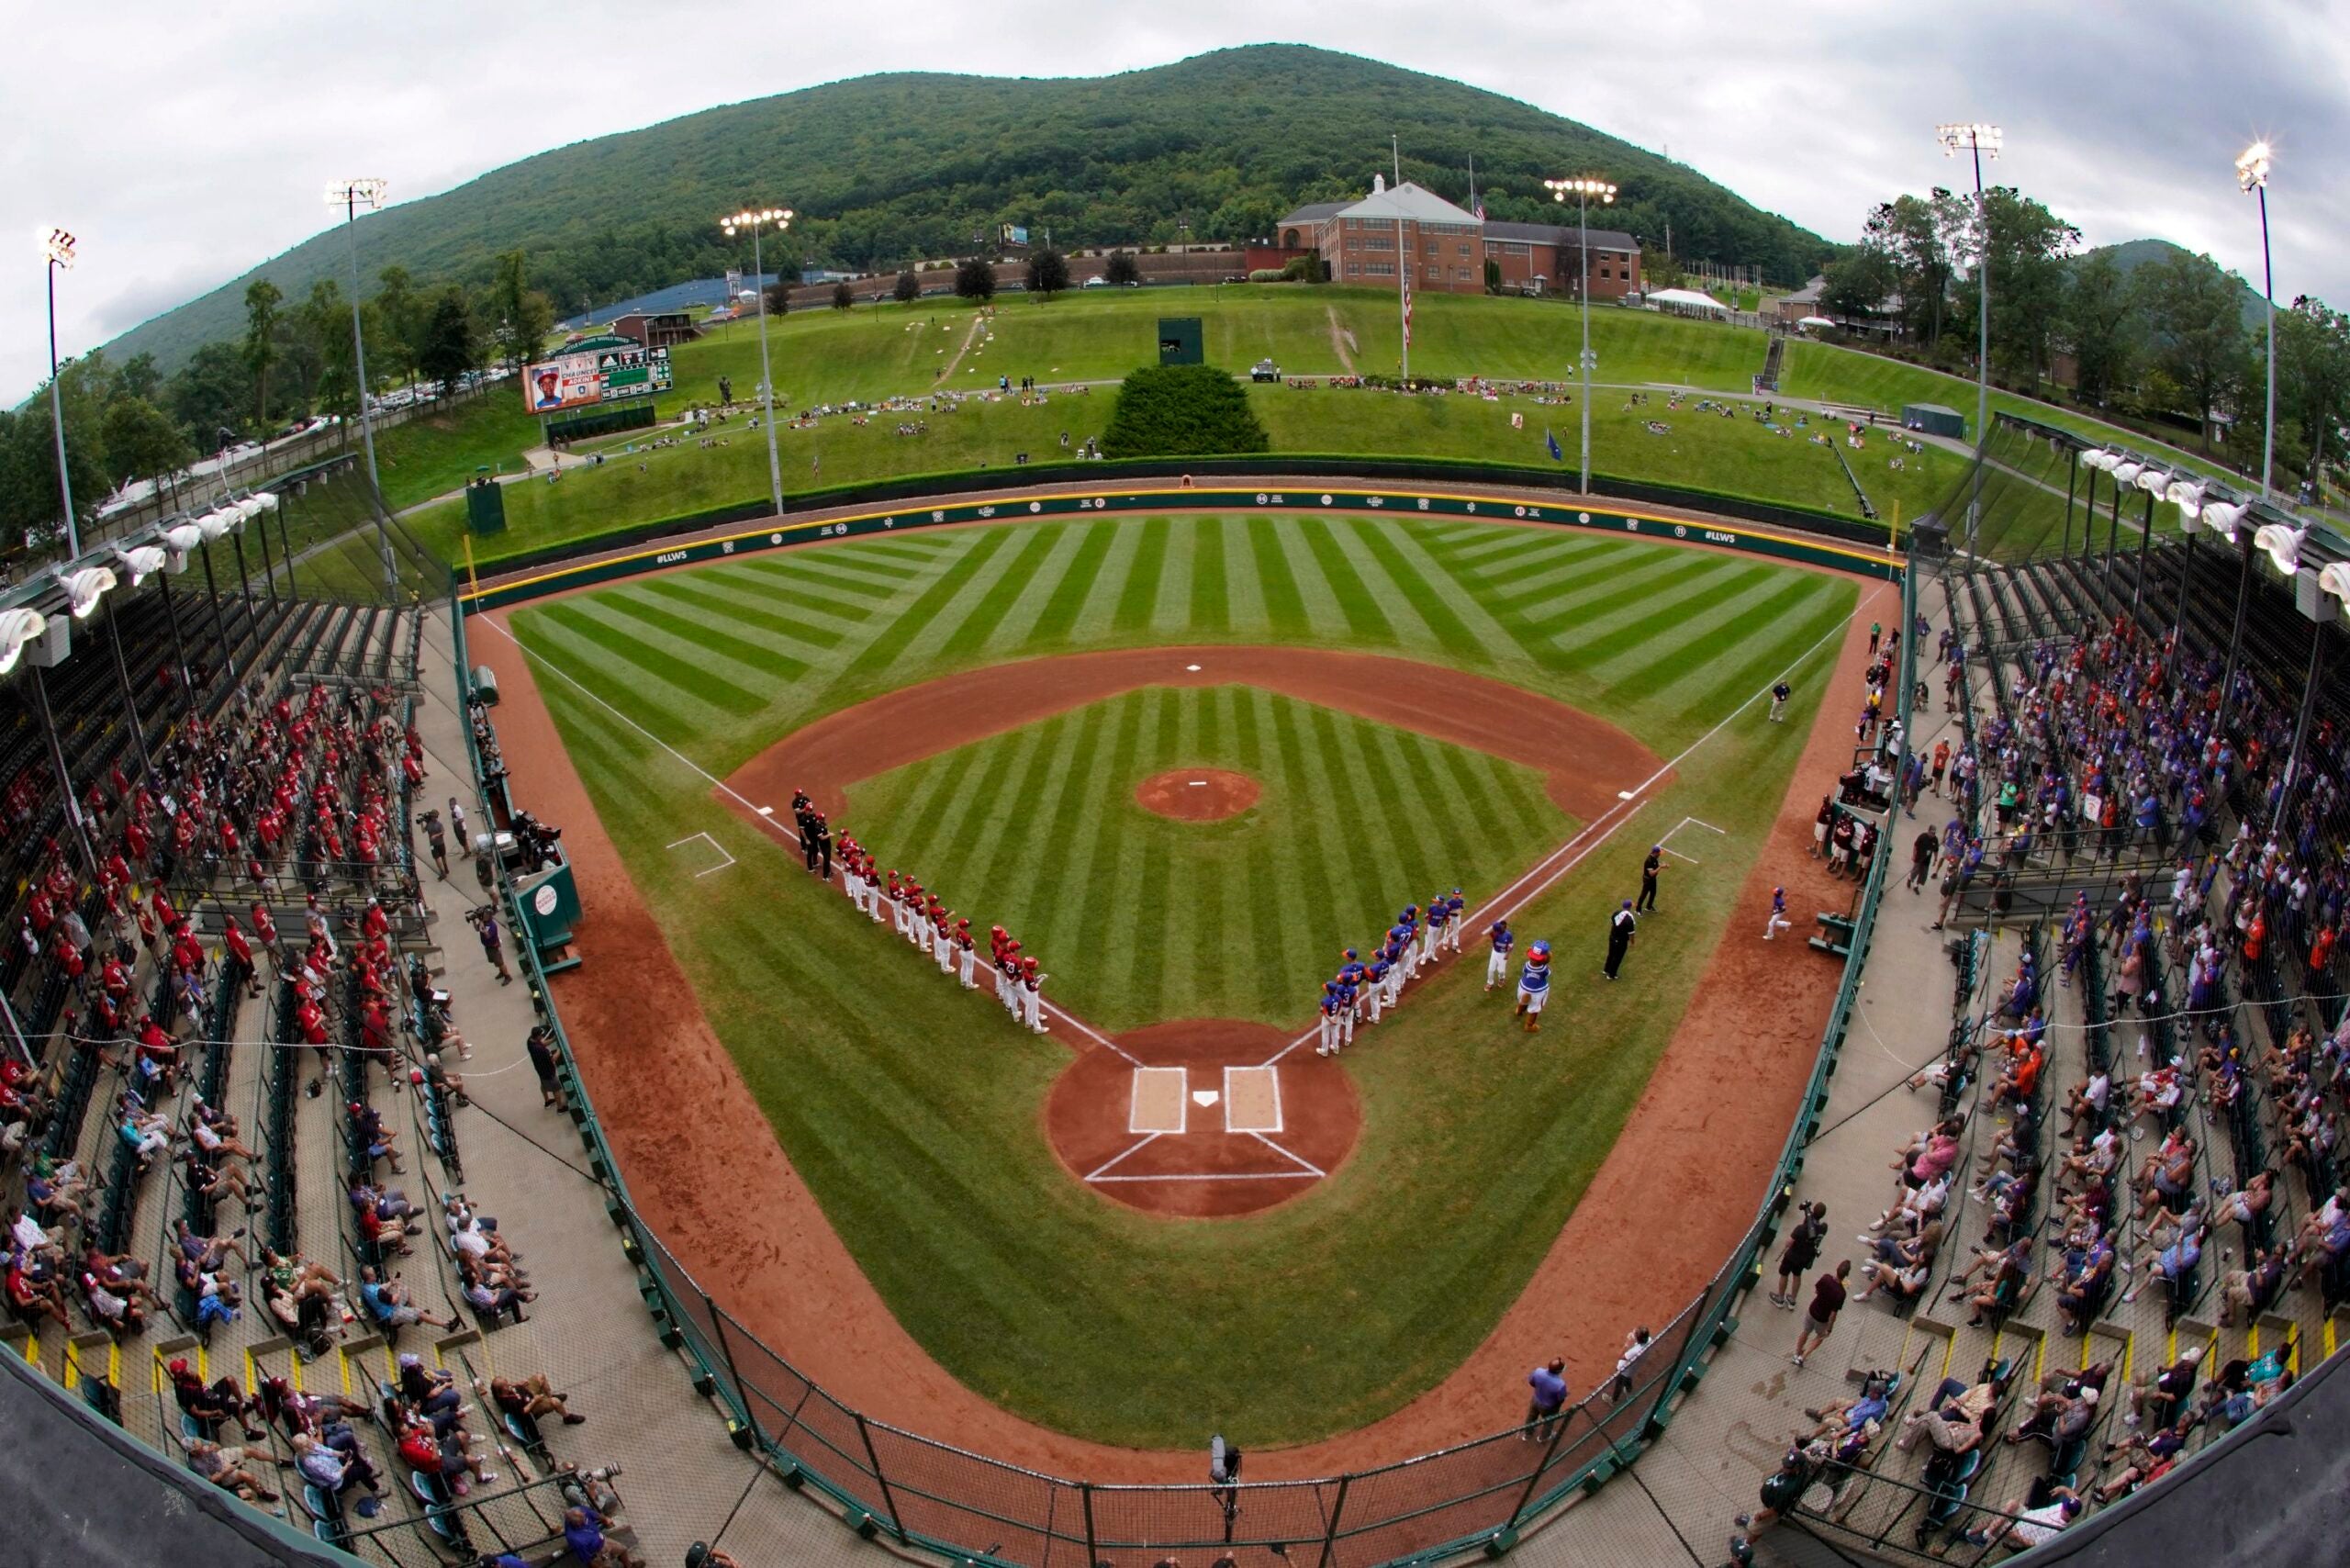 Nolensville falls to Ohio in first game of Little League World Series